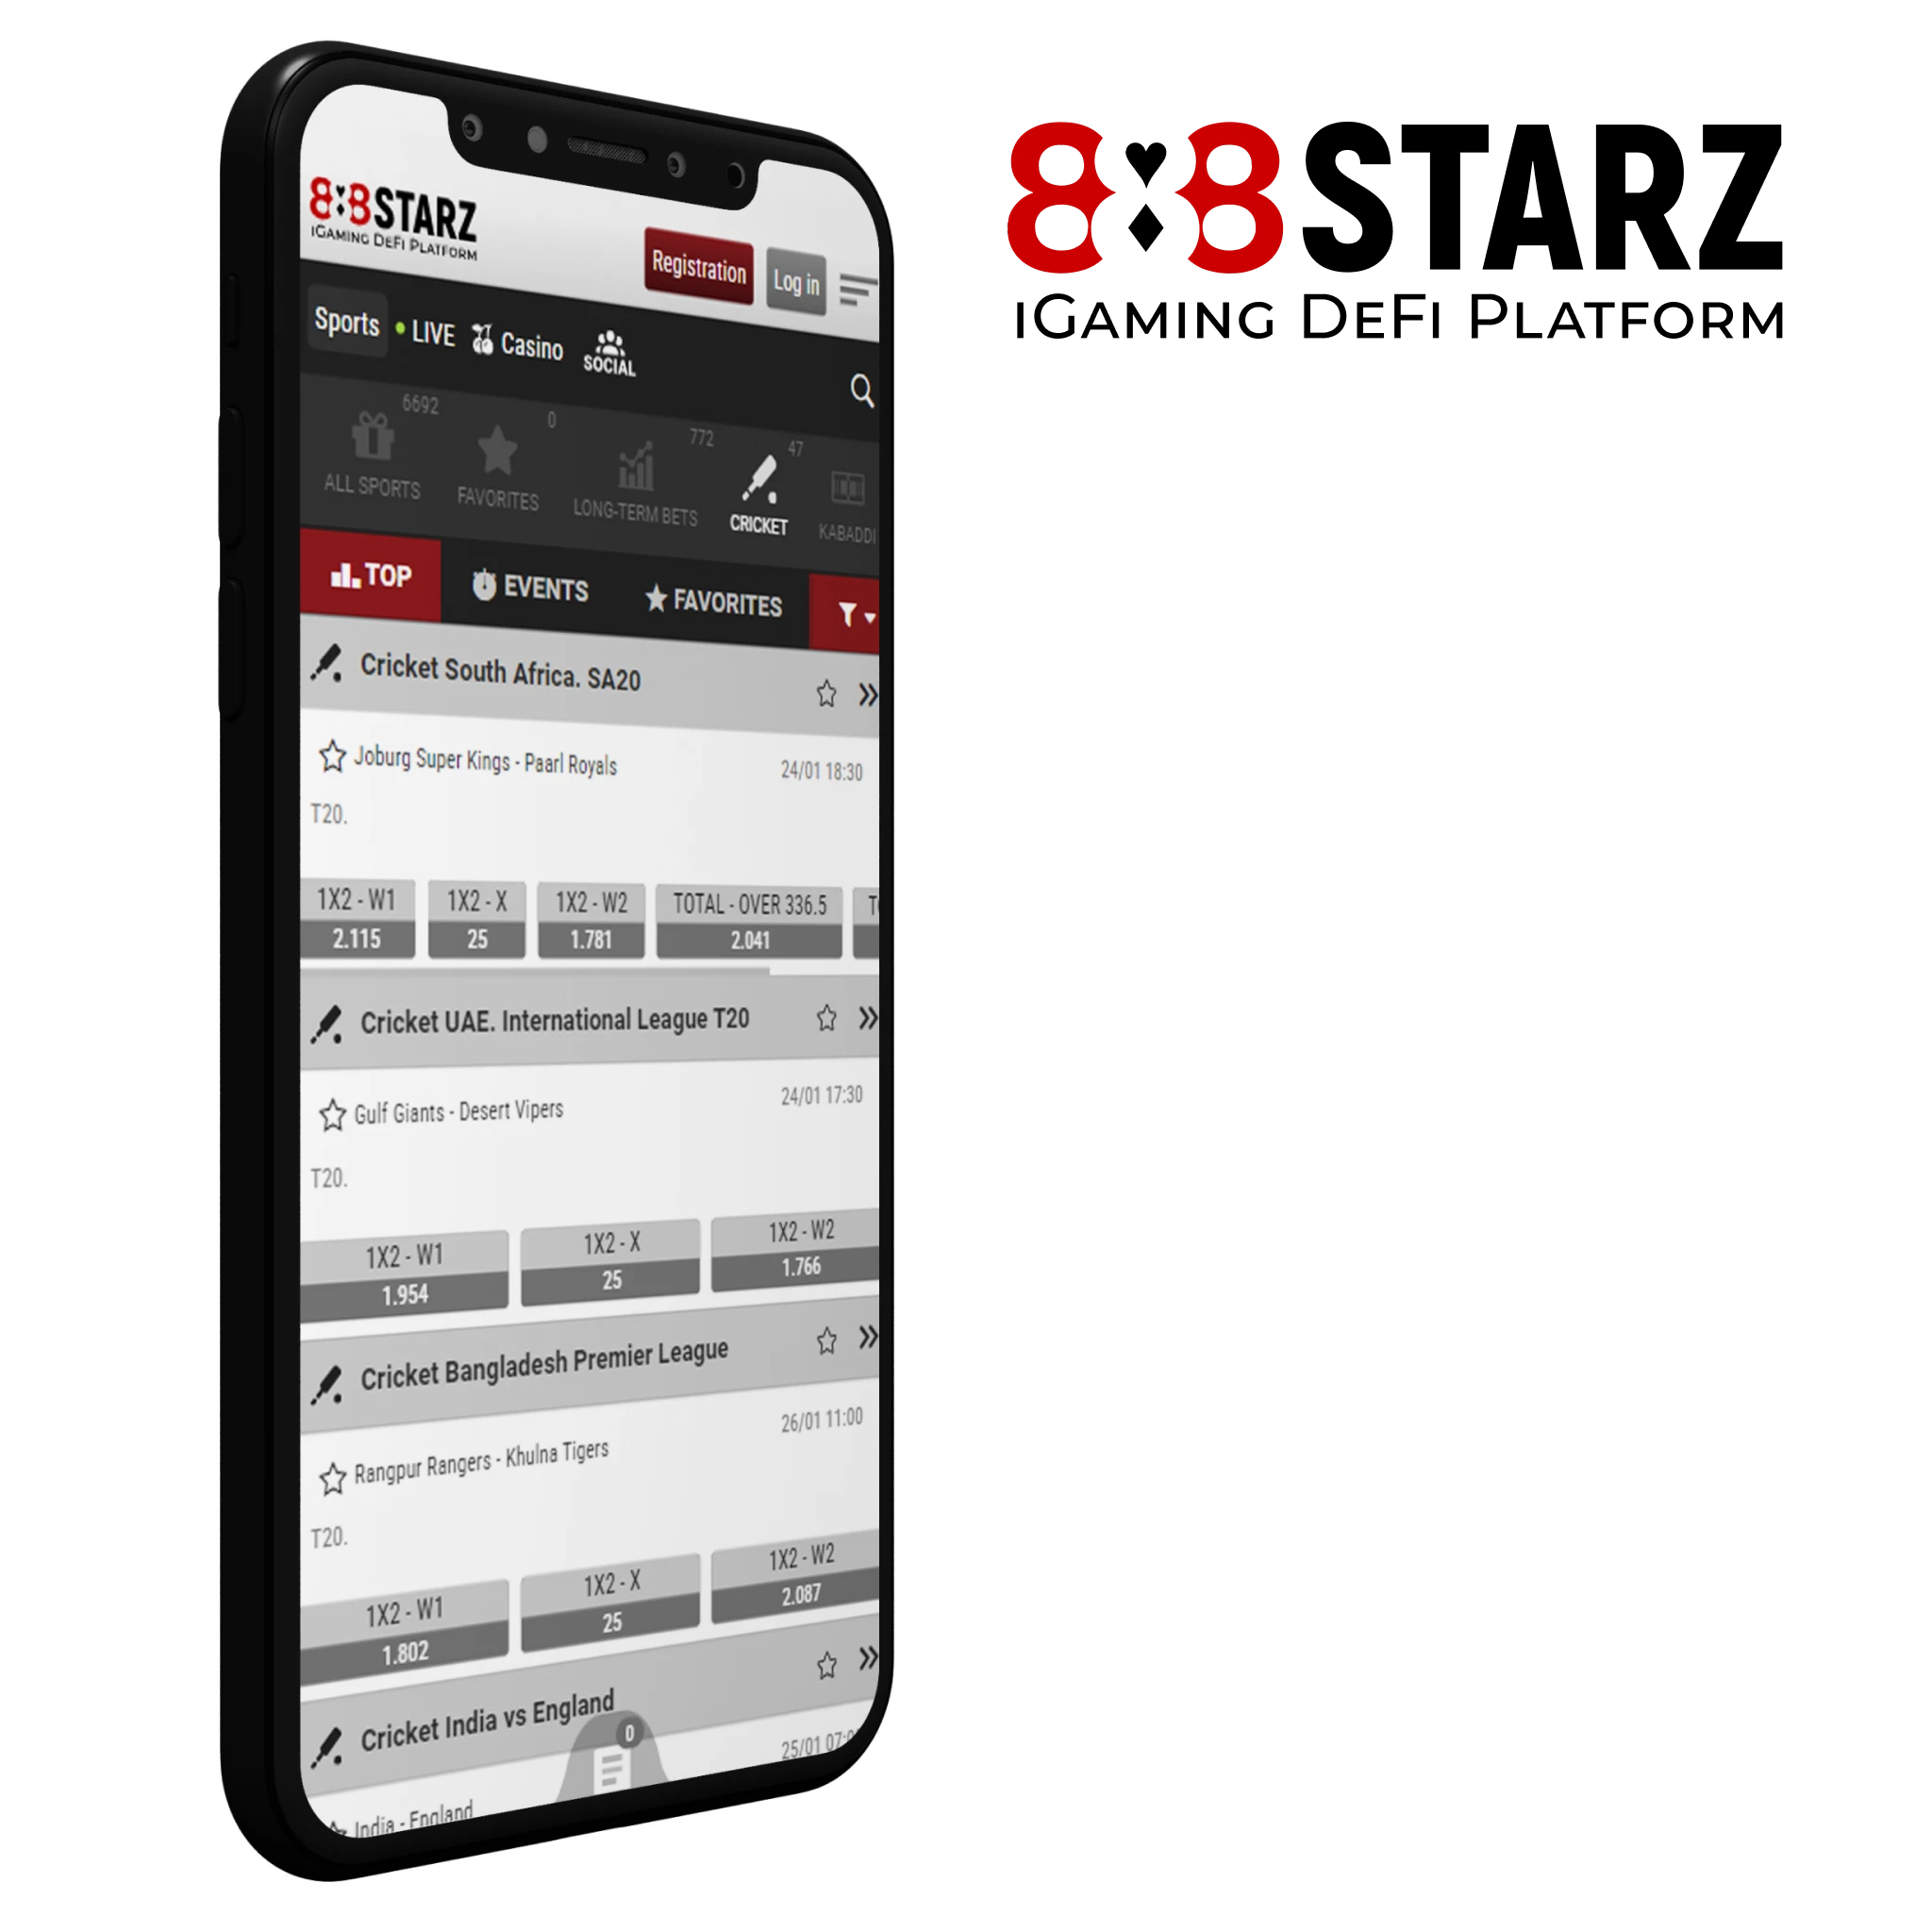 The 888starz app offers an affordable minimum deposit for cricket betting.